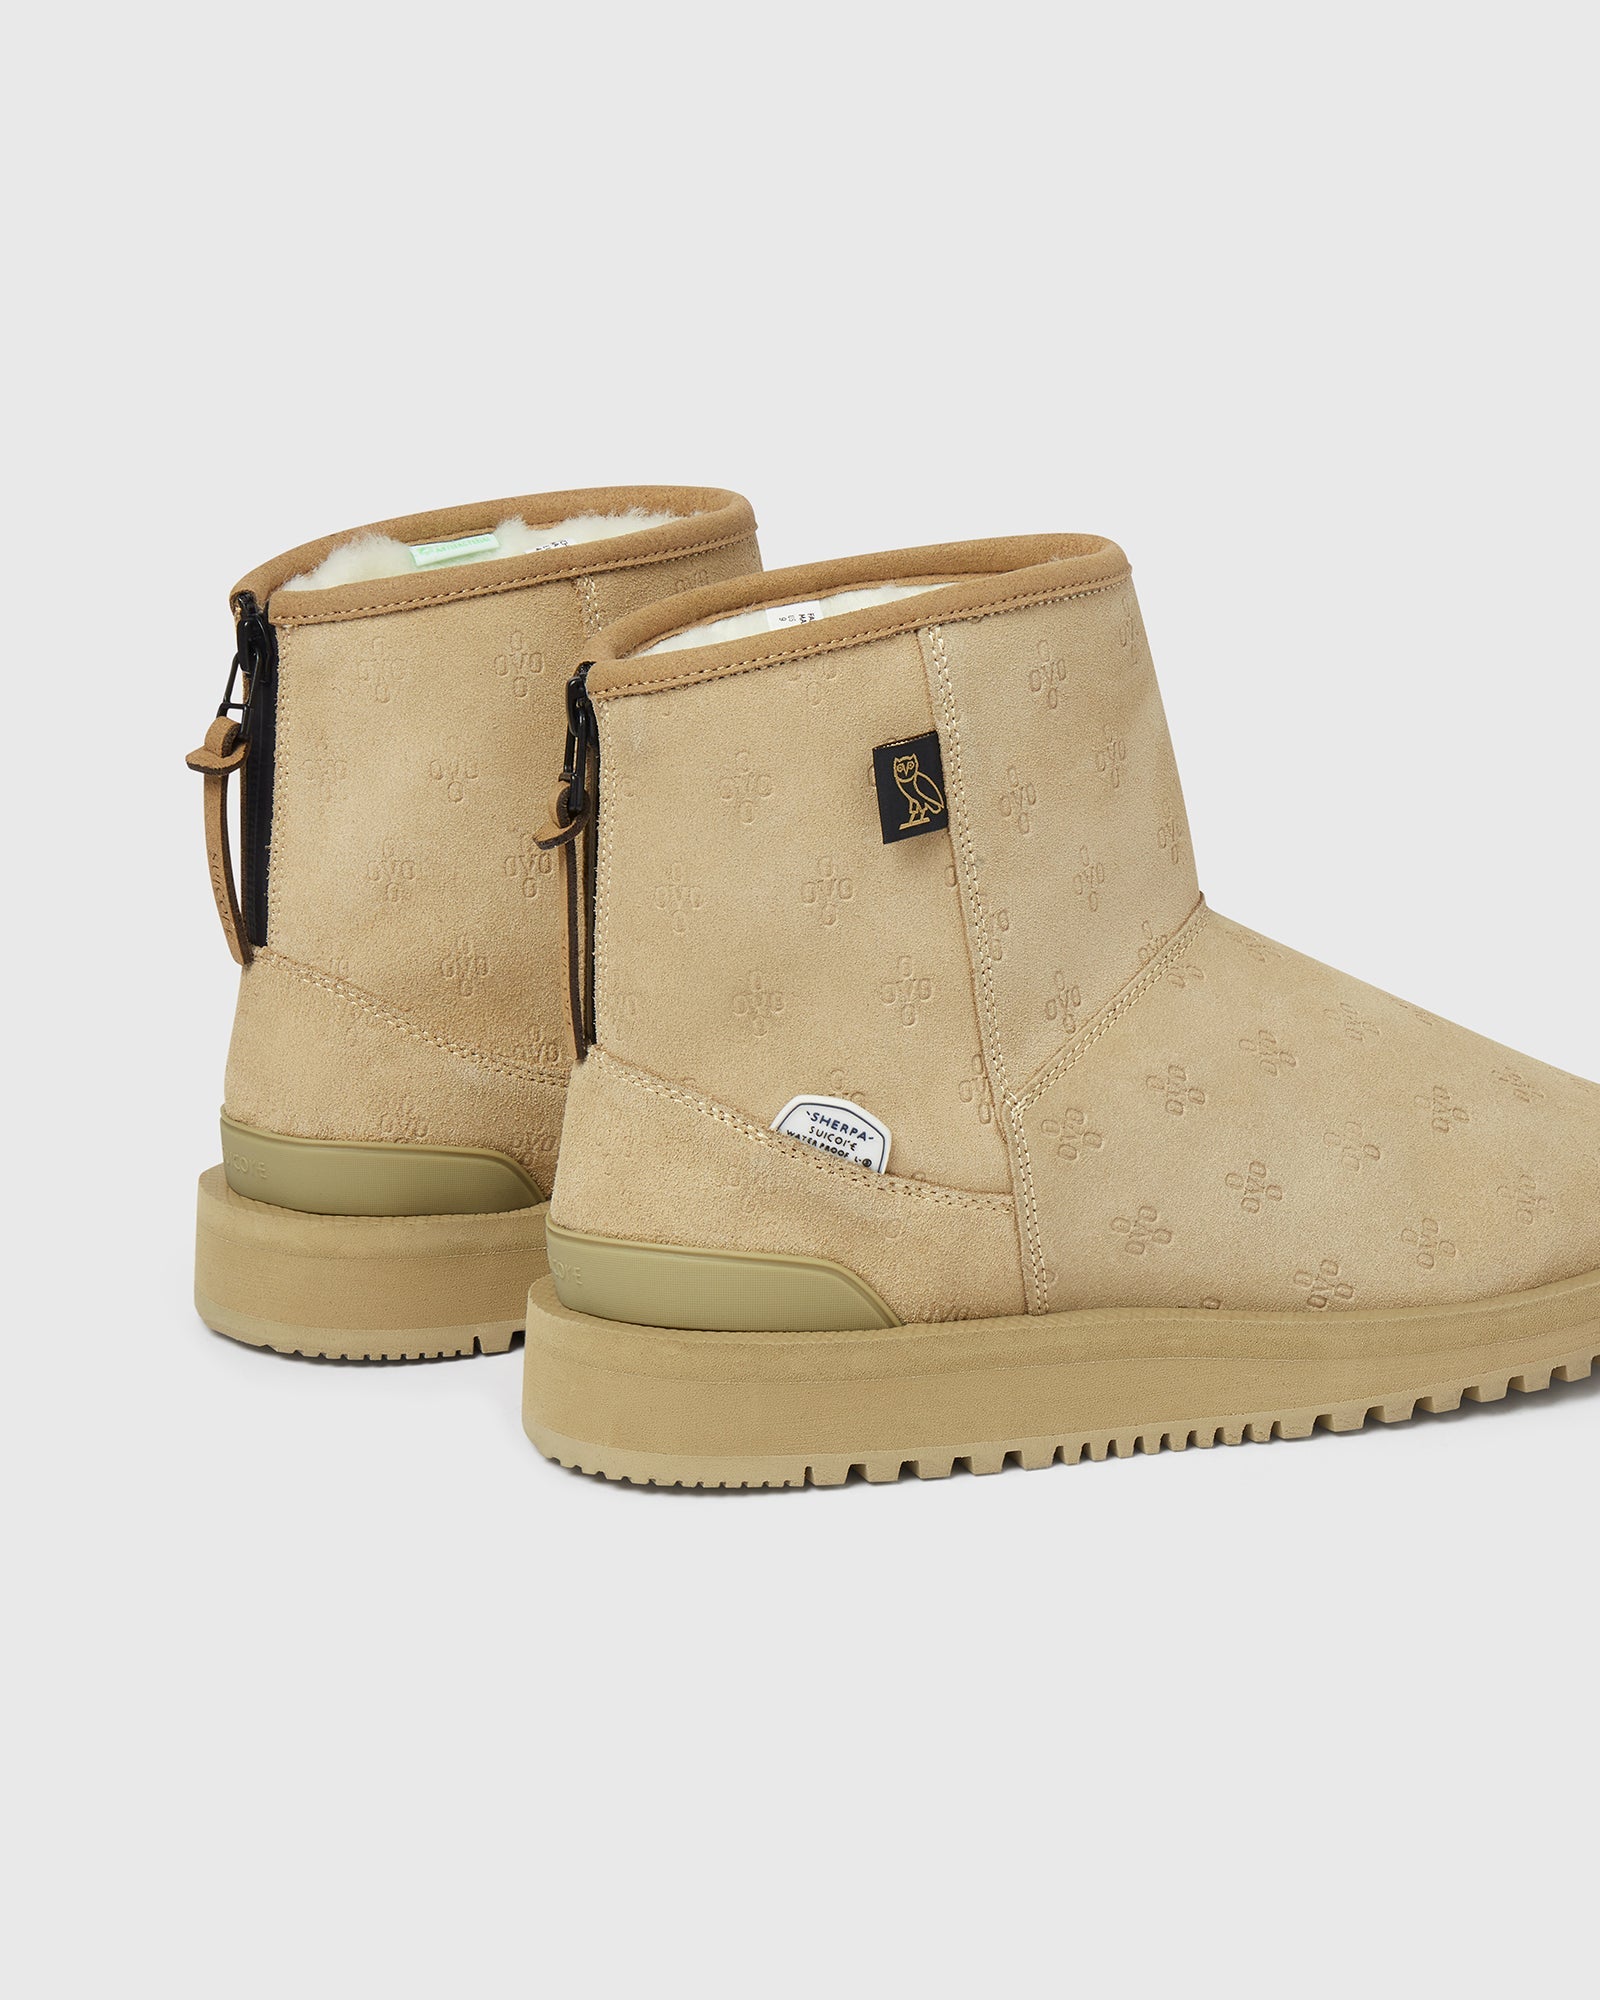 SUICOKE OVO Edition ELS-Mwpab-MID in Beige OG-080MWPAB-OVO | Shop from eightywingold an official brand partner for SUICOKE Canada and US.